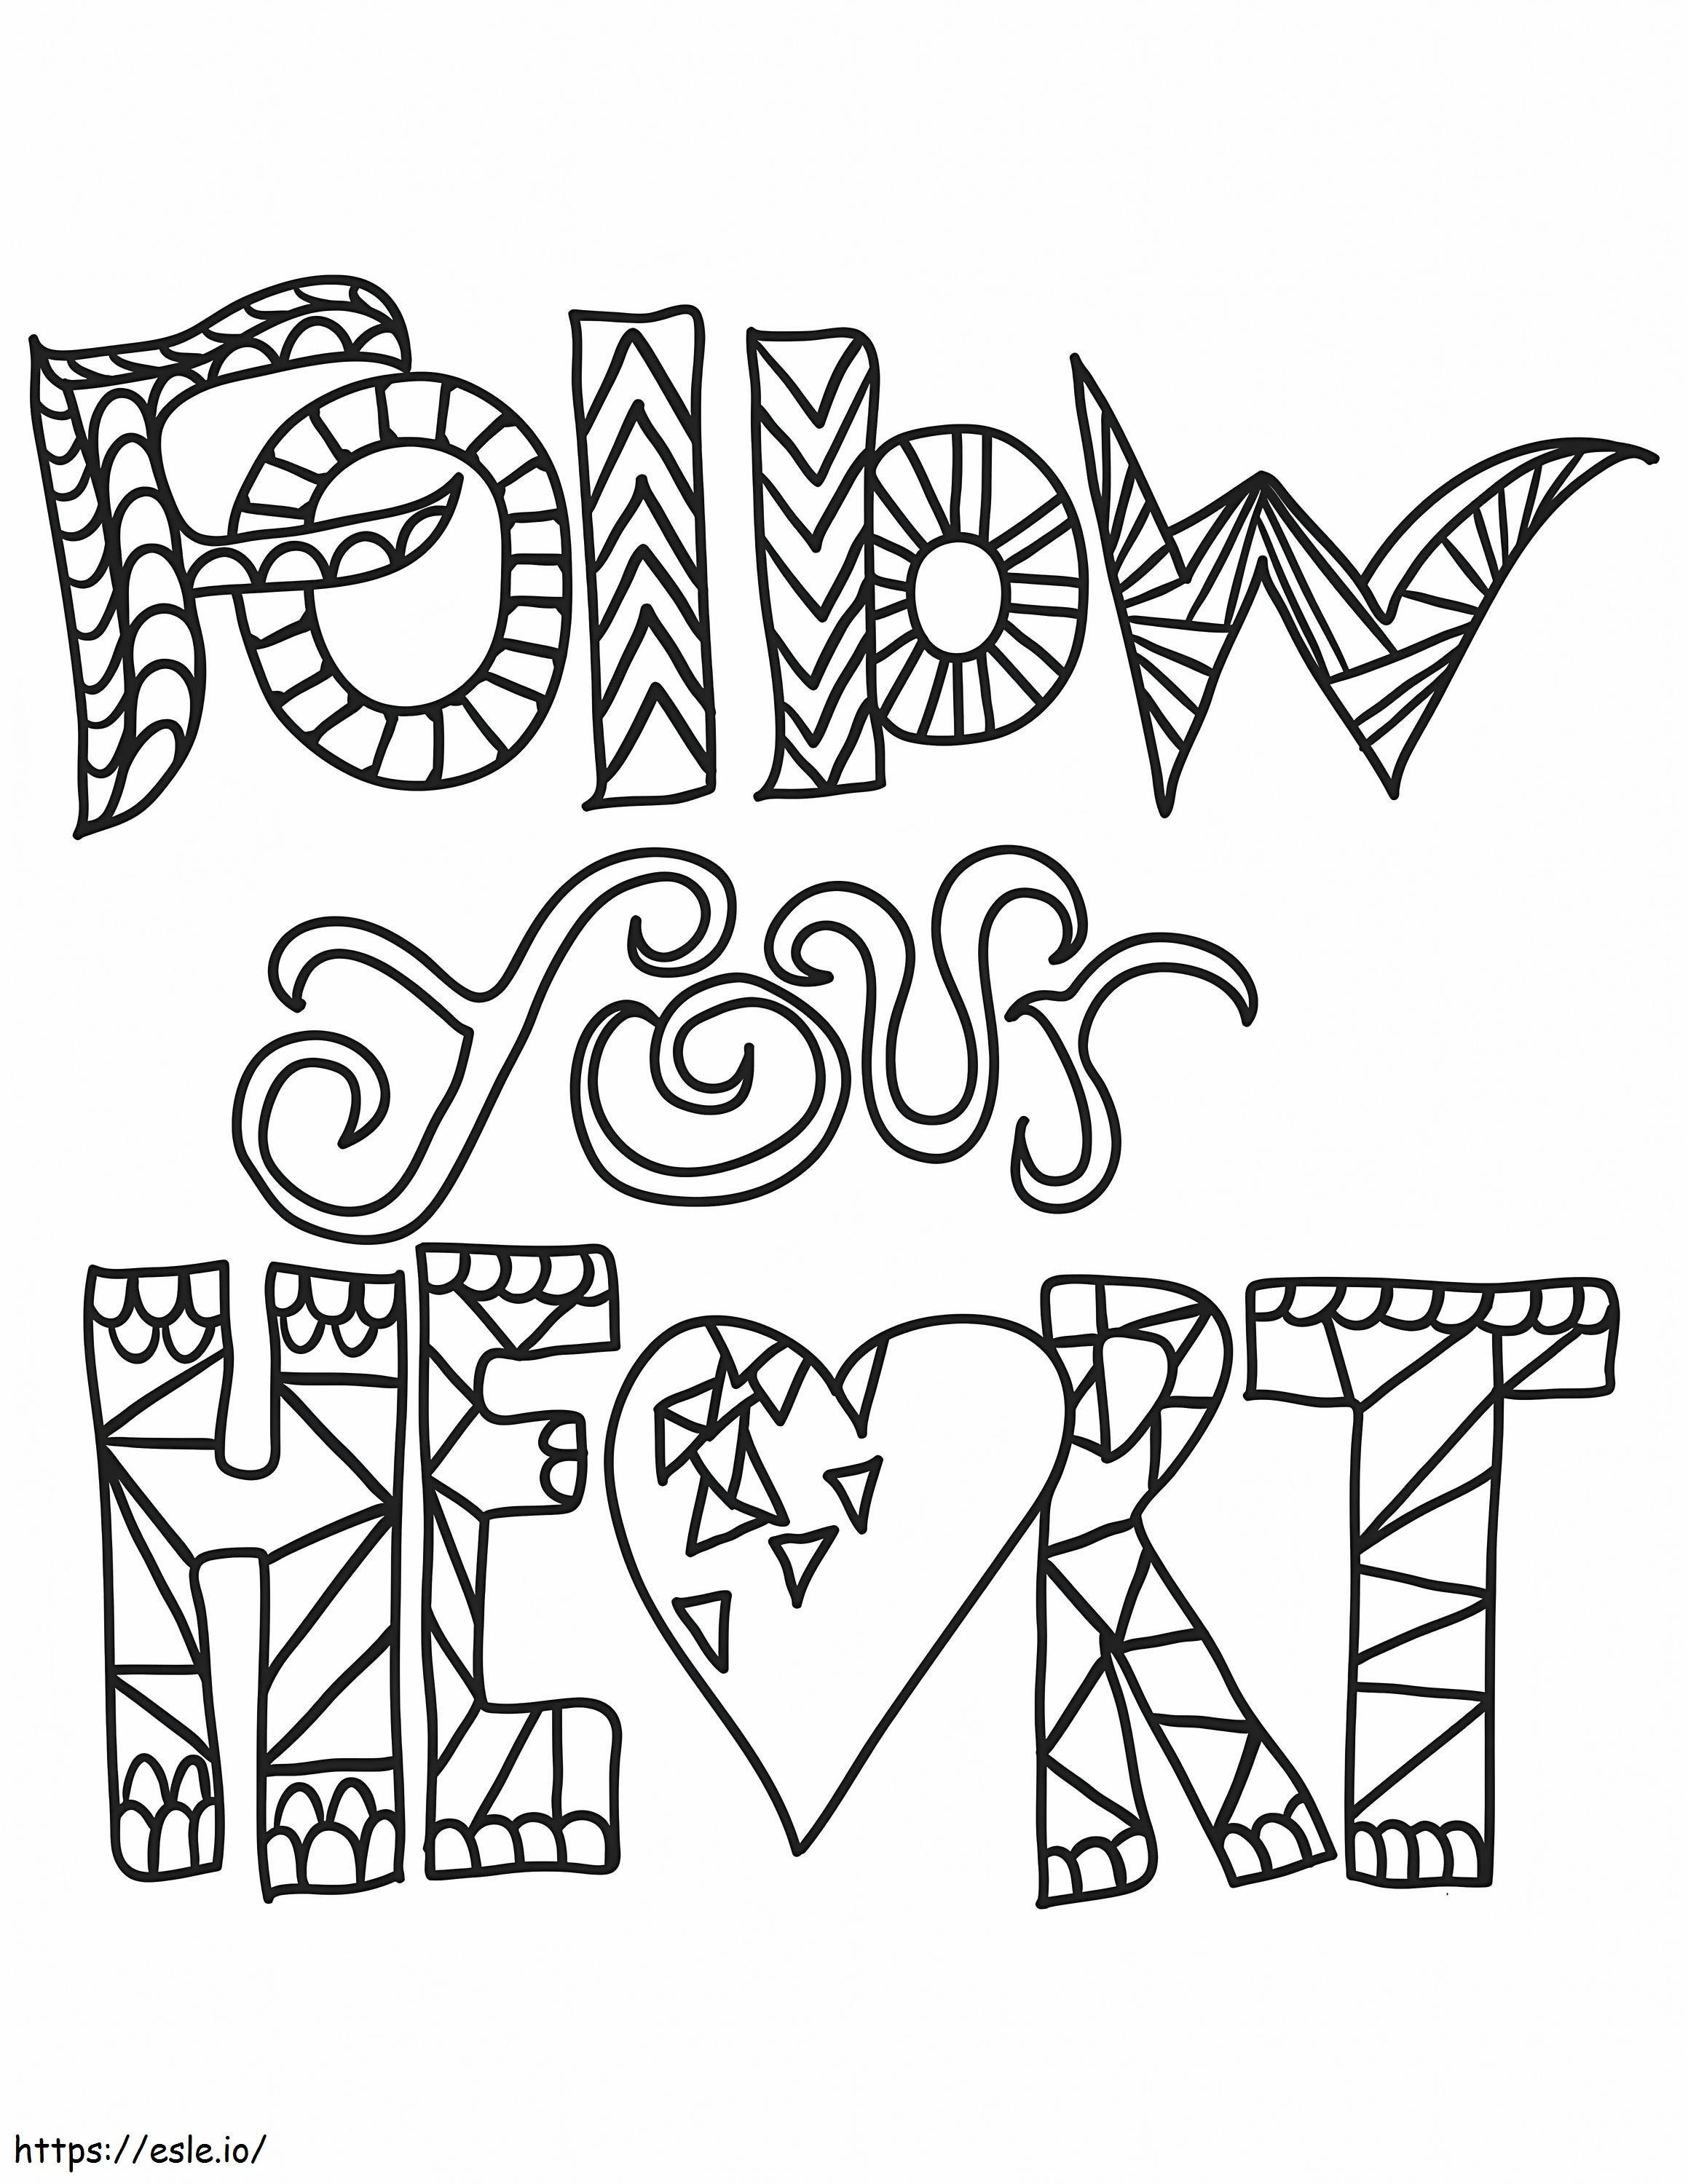 1576230838 Follow Your Heart coloring page